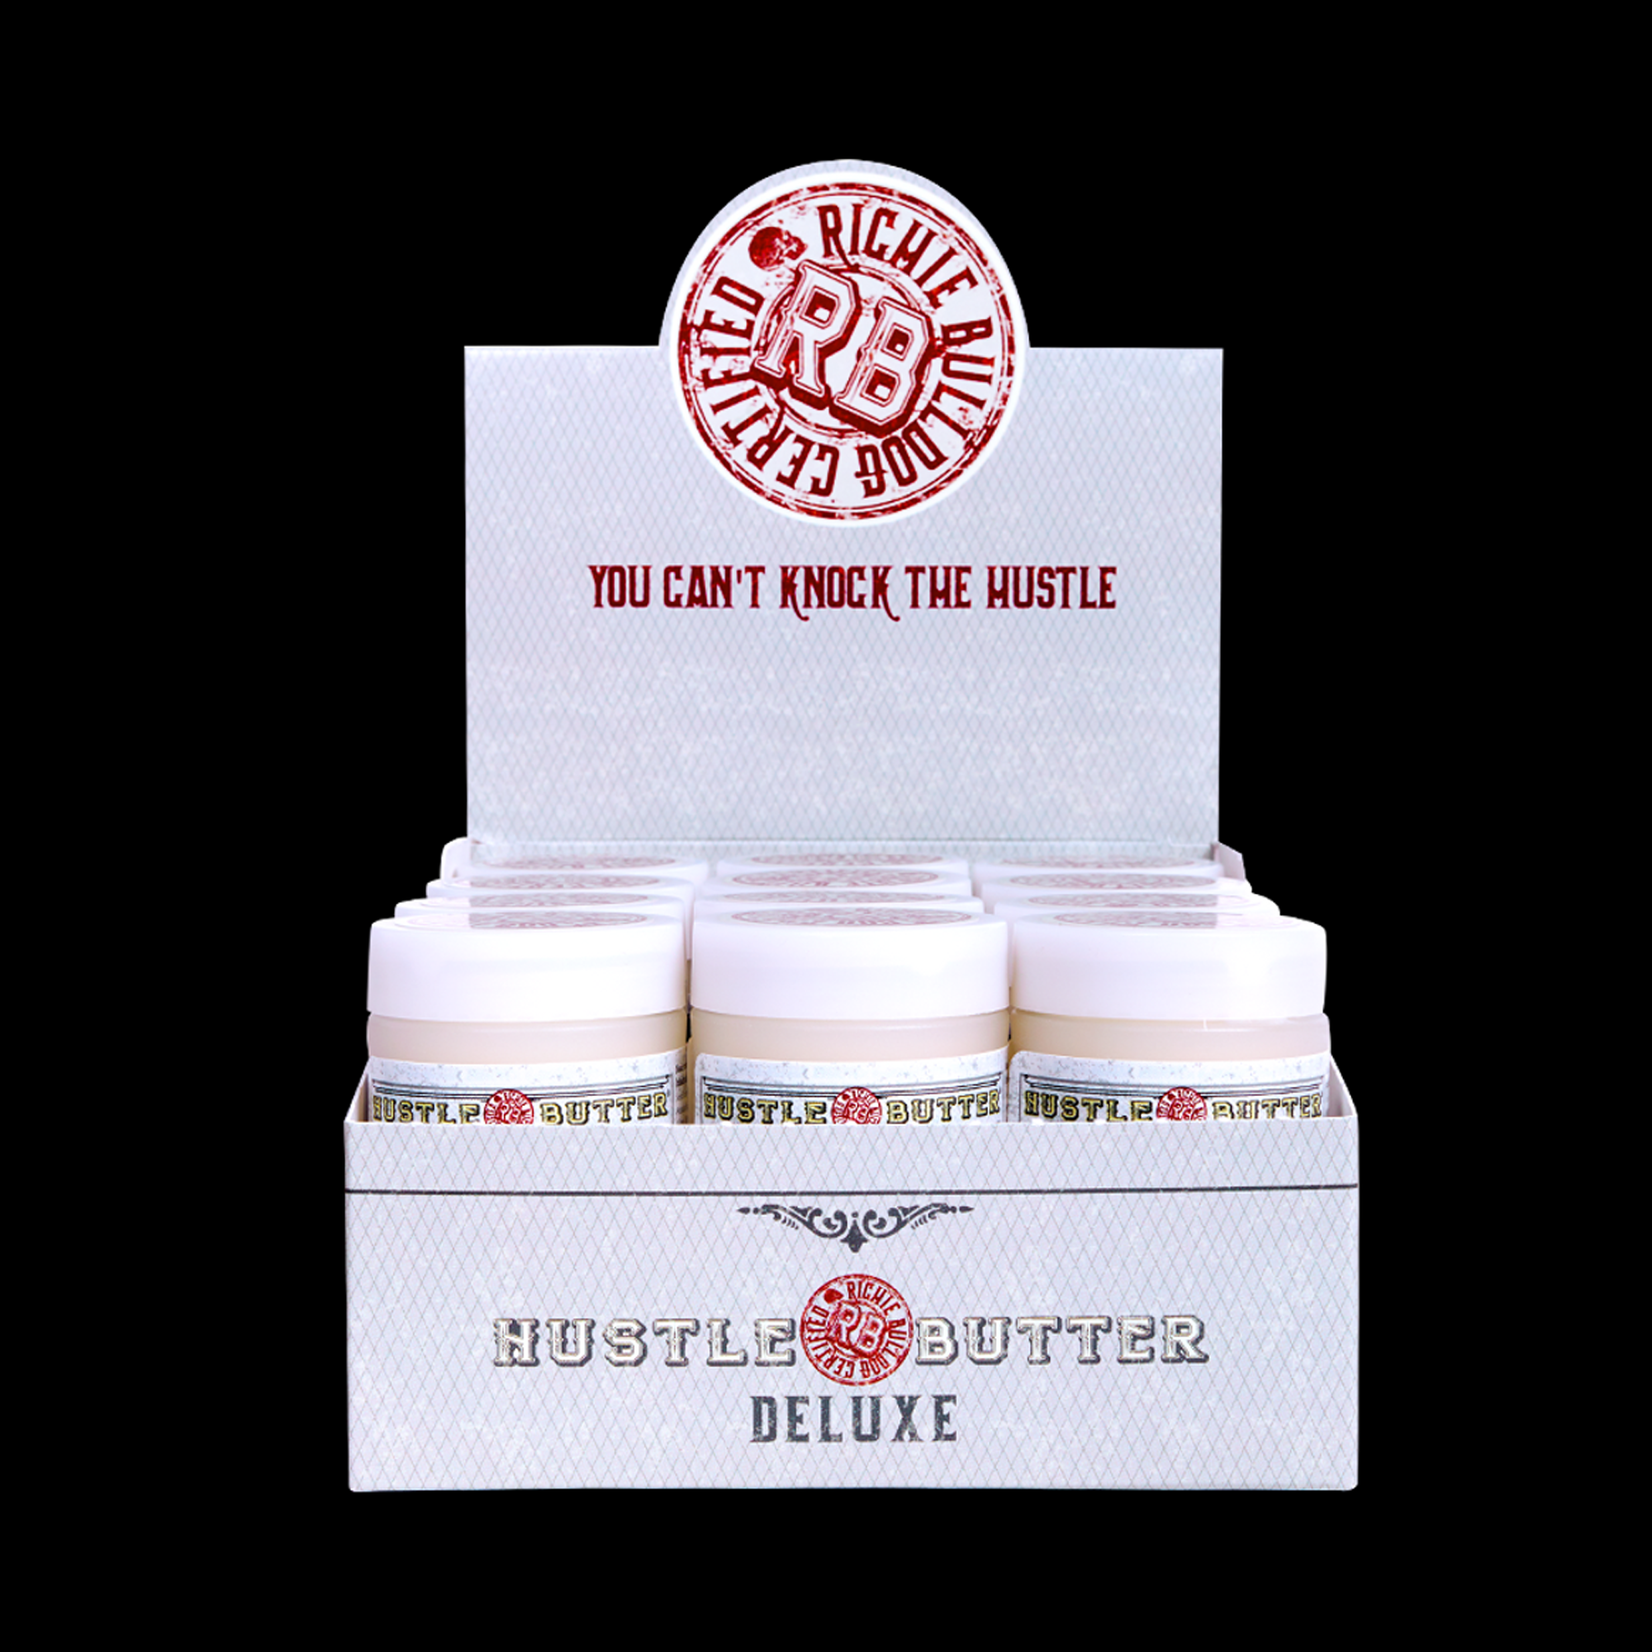 HUSTLE BUTTER DELUXE - 1OZ 24 UNITS WITH DISPLAY